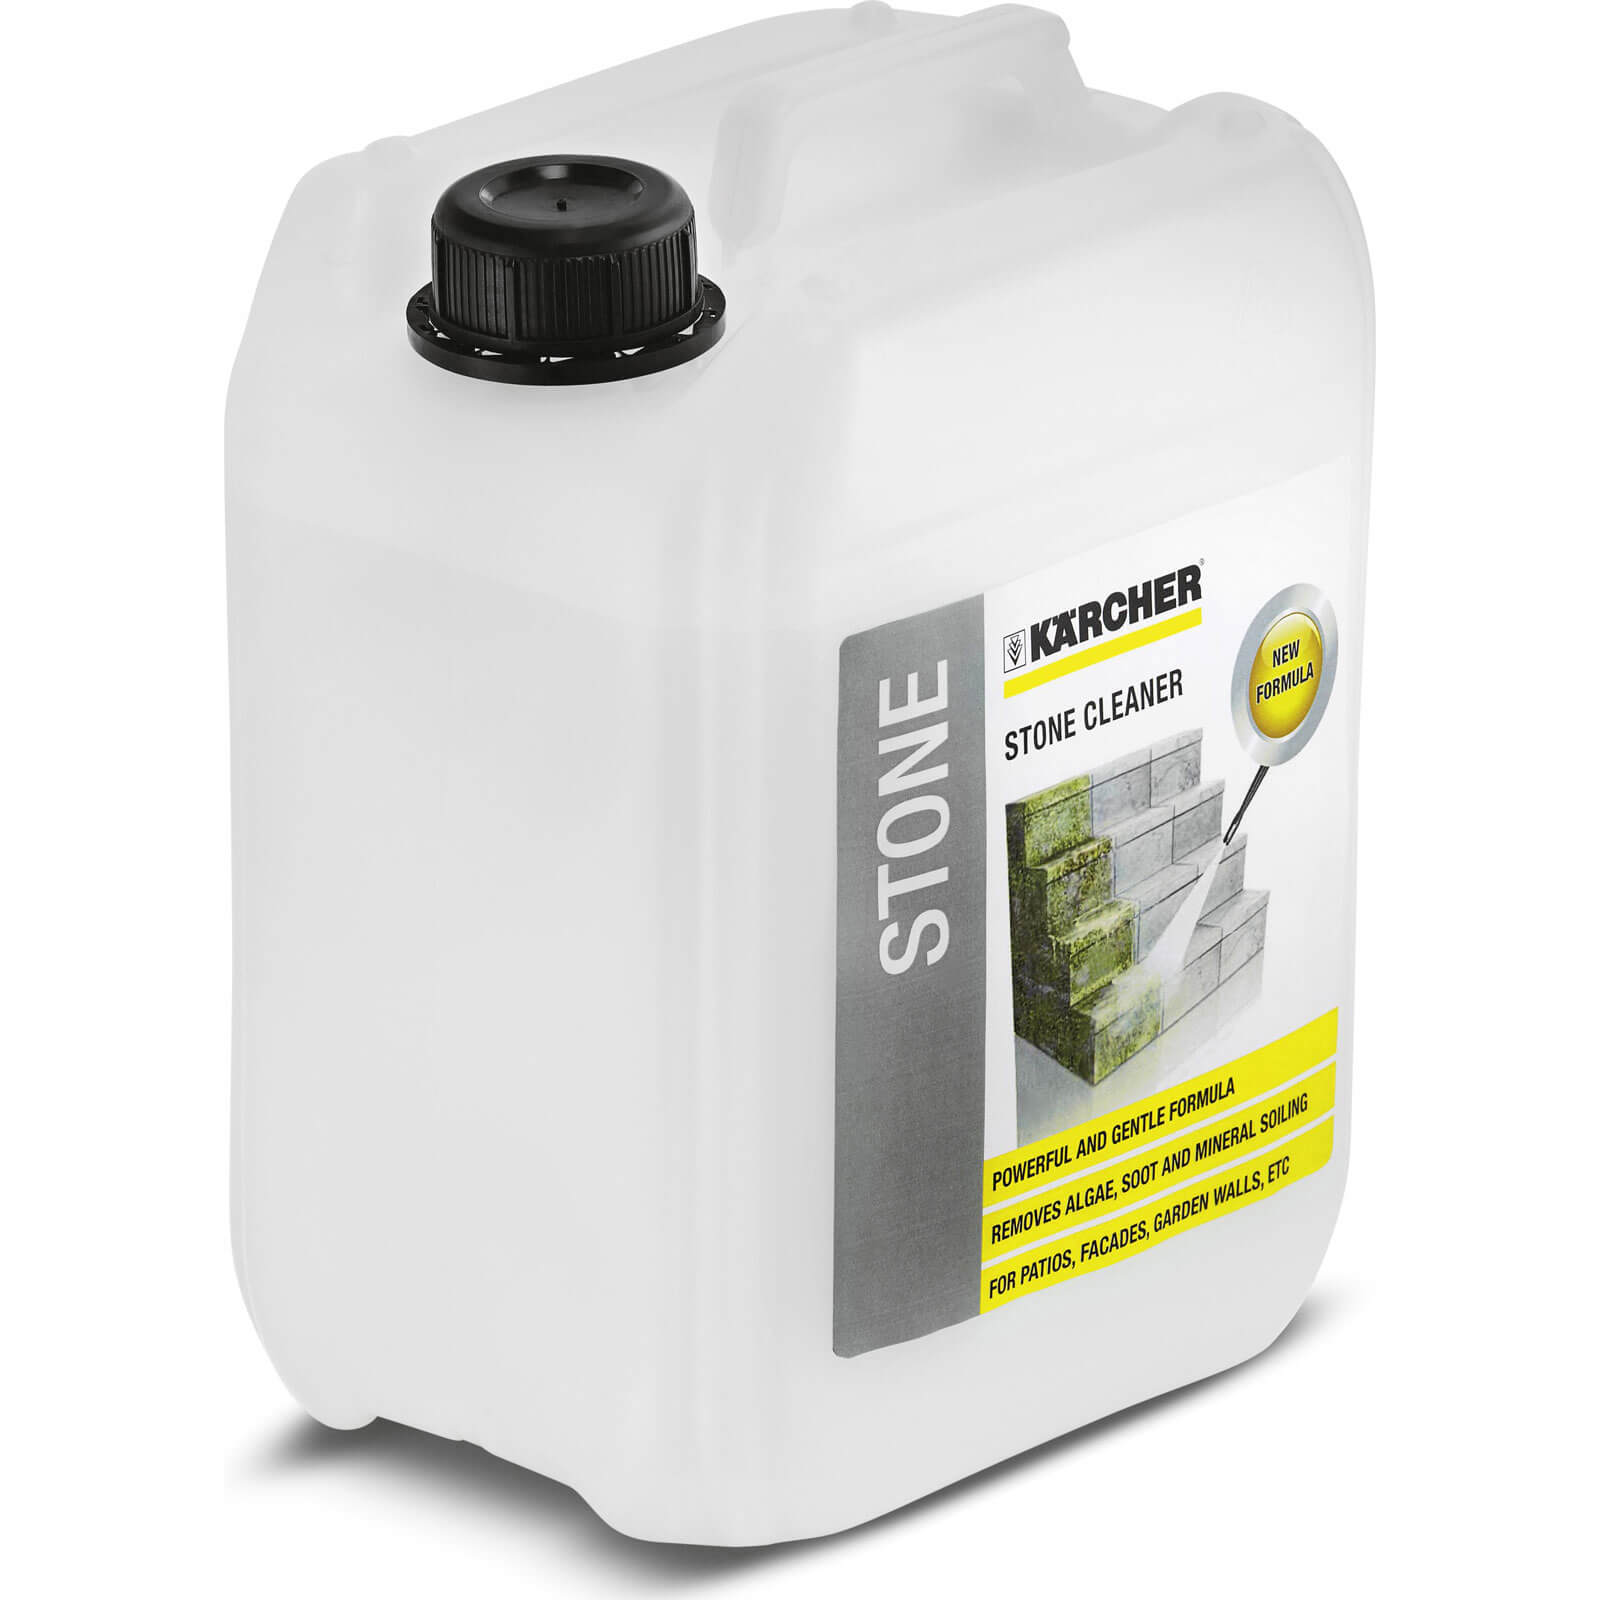 Karcher Multi Purpose Stone & Facade Plug n Clean Detergent Cleaner 5 Litre for Pressure Washers